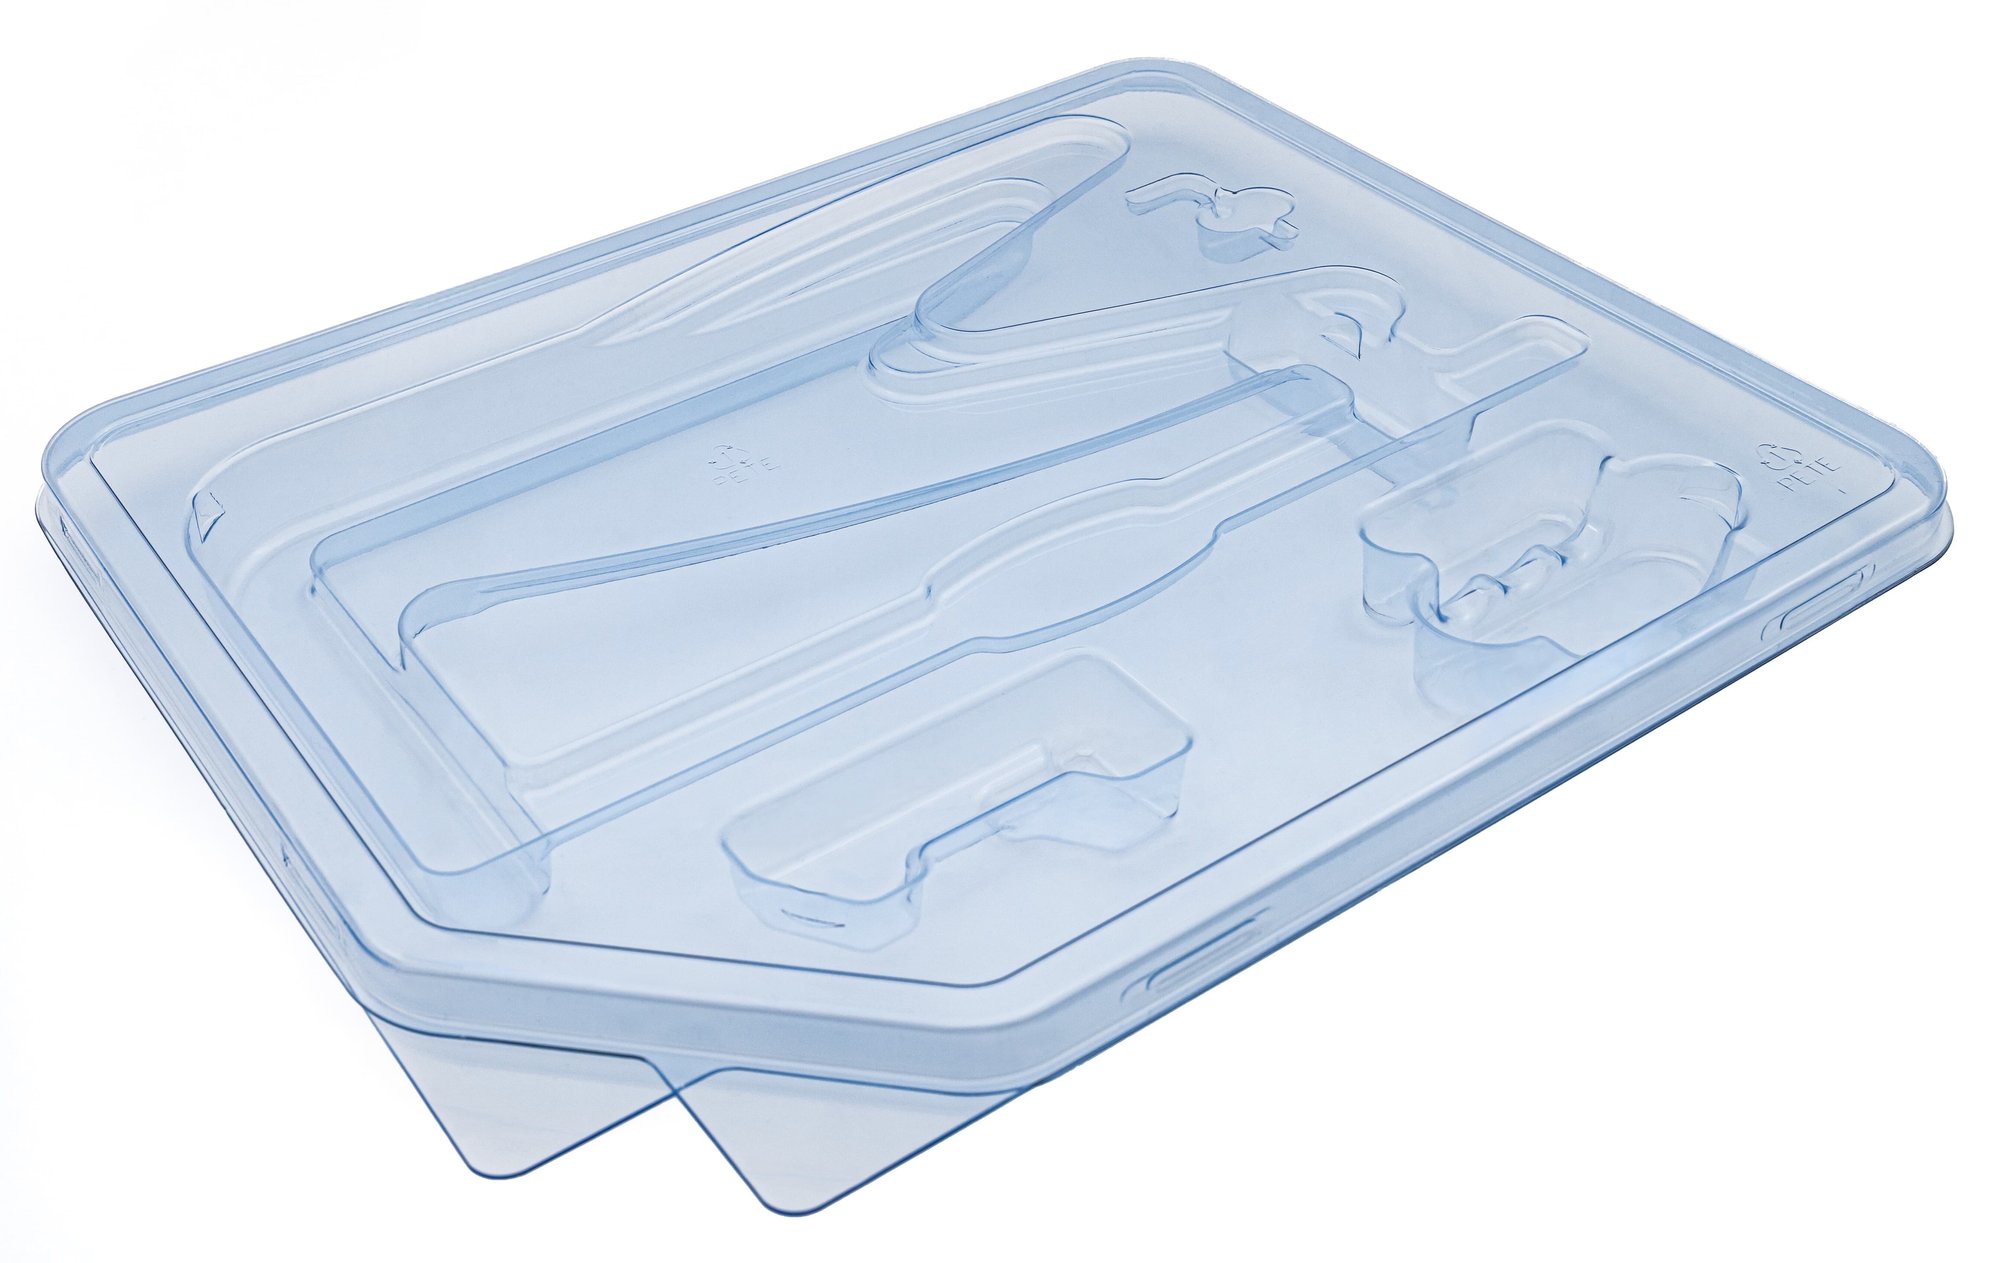 Thermoformed medical packaging